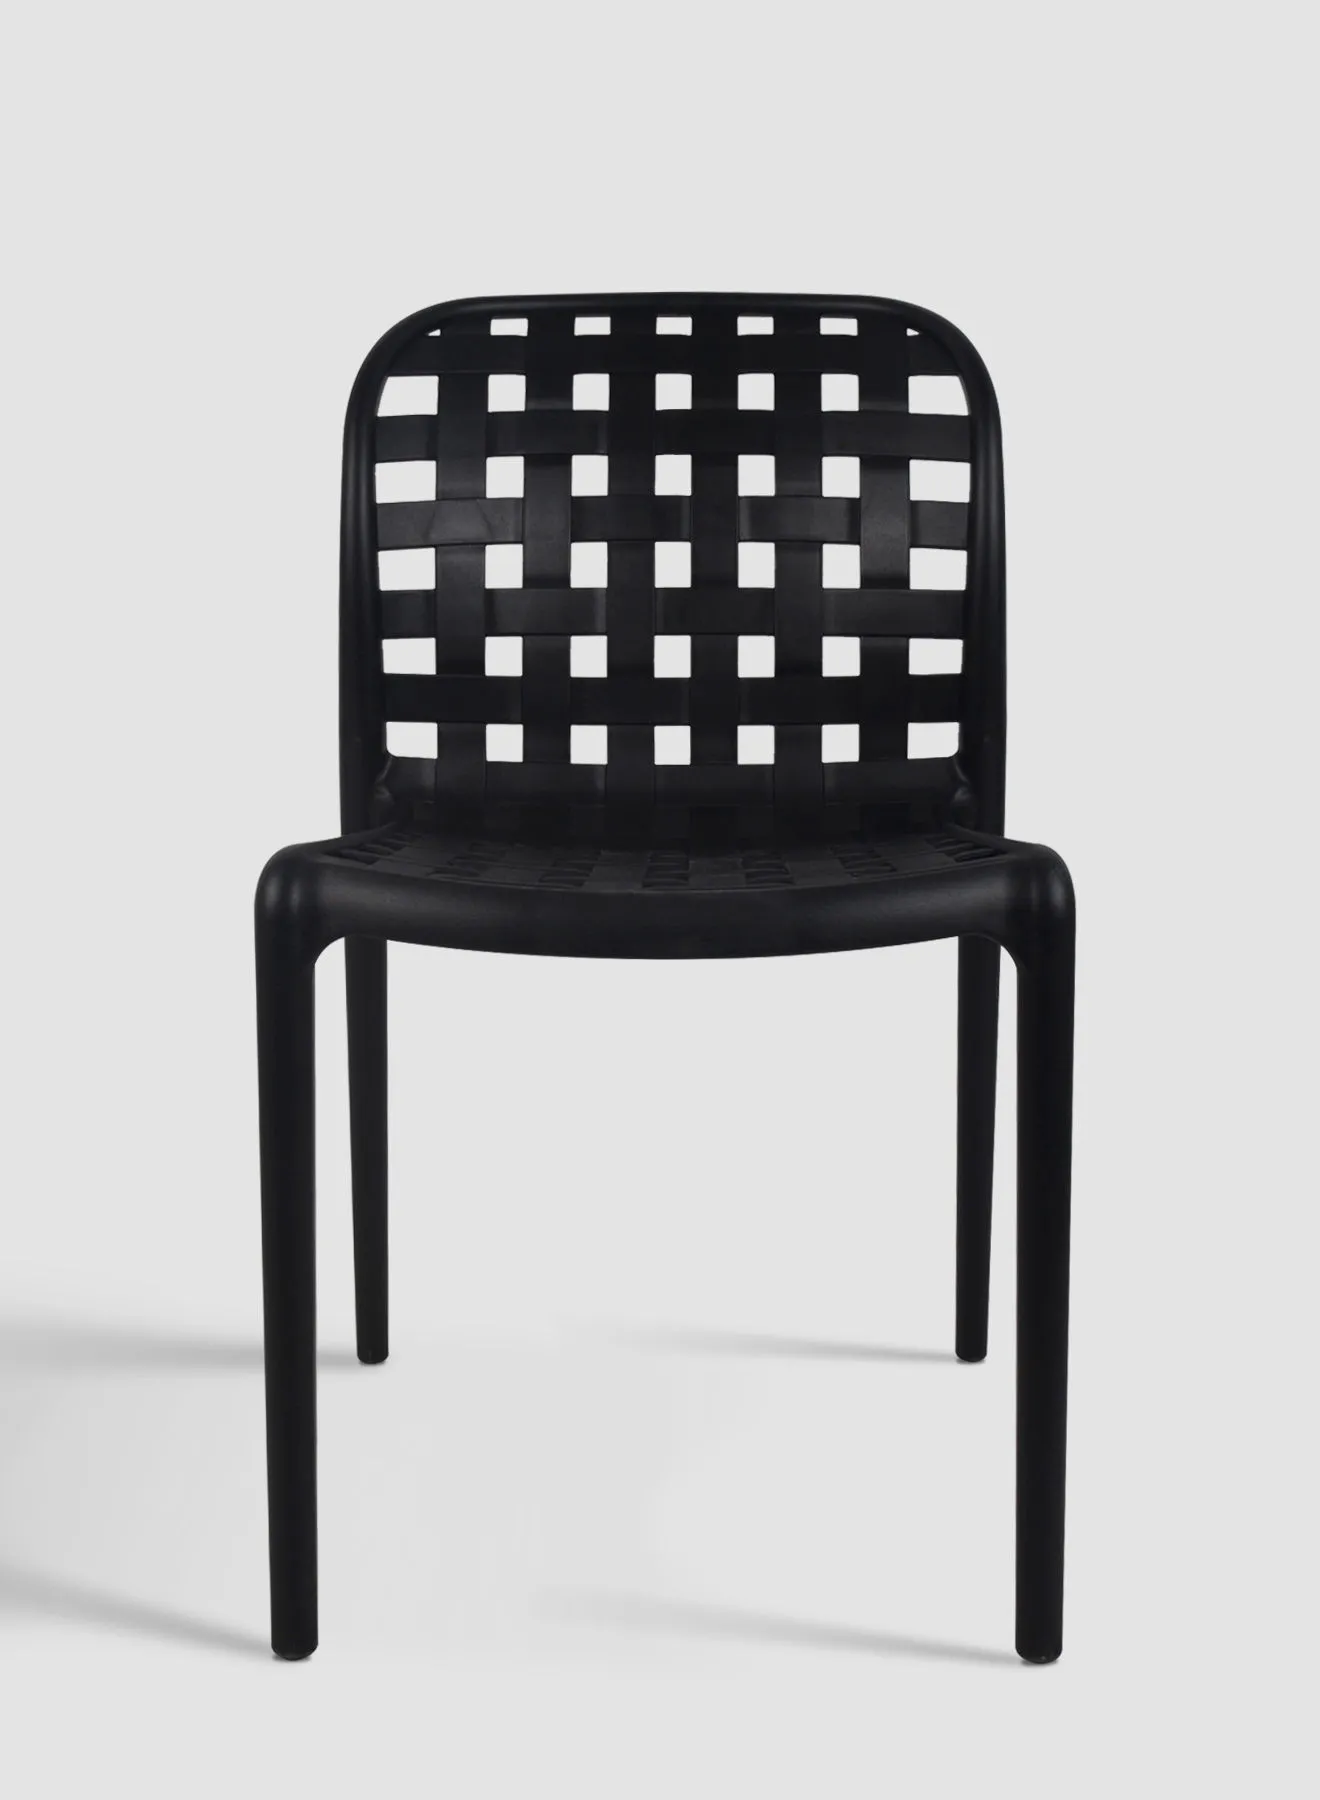 Switch Dining Chair In Black Plastic Chair Size 57 X 51 X 84cm